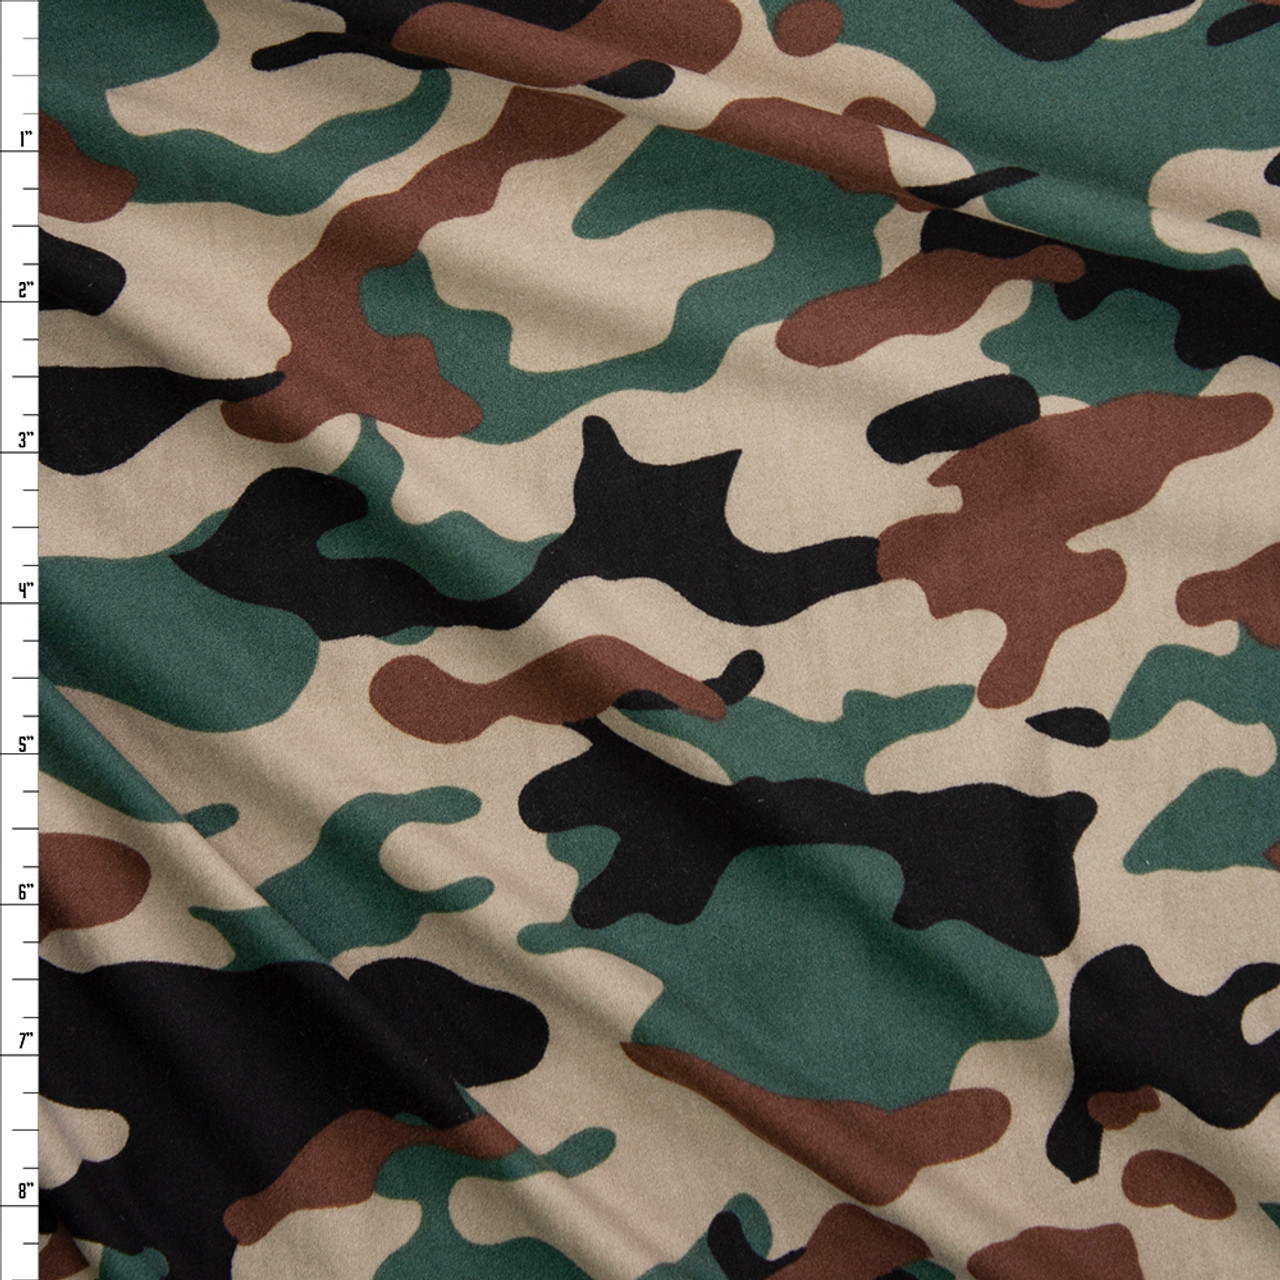 Cali Fabrics Moss Camo Double Brushed Poly/Spandex Knit Fabric by the Yard